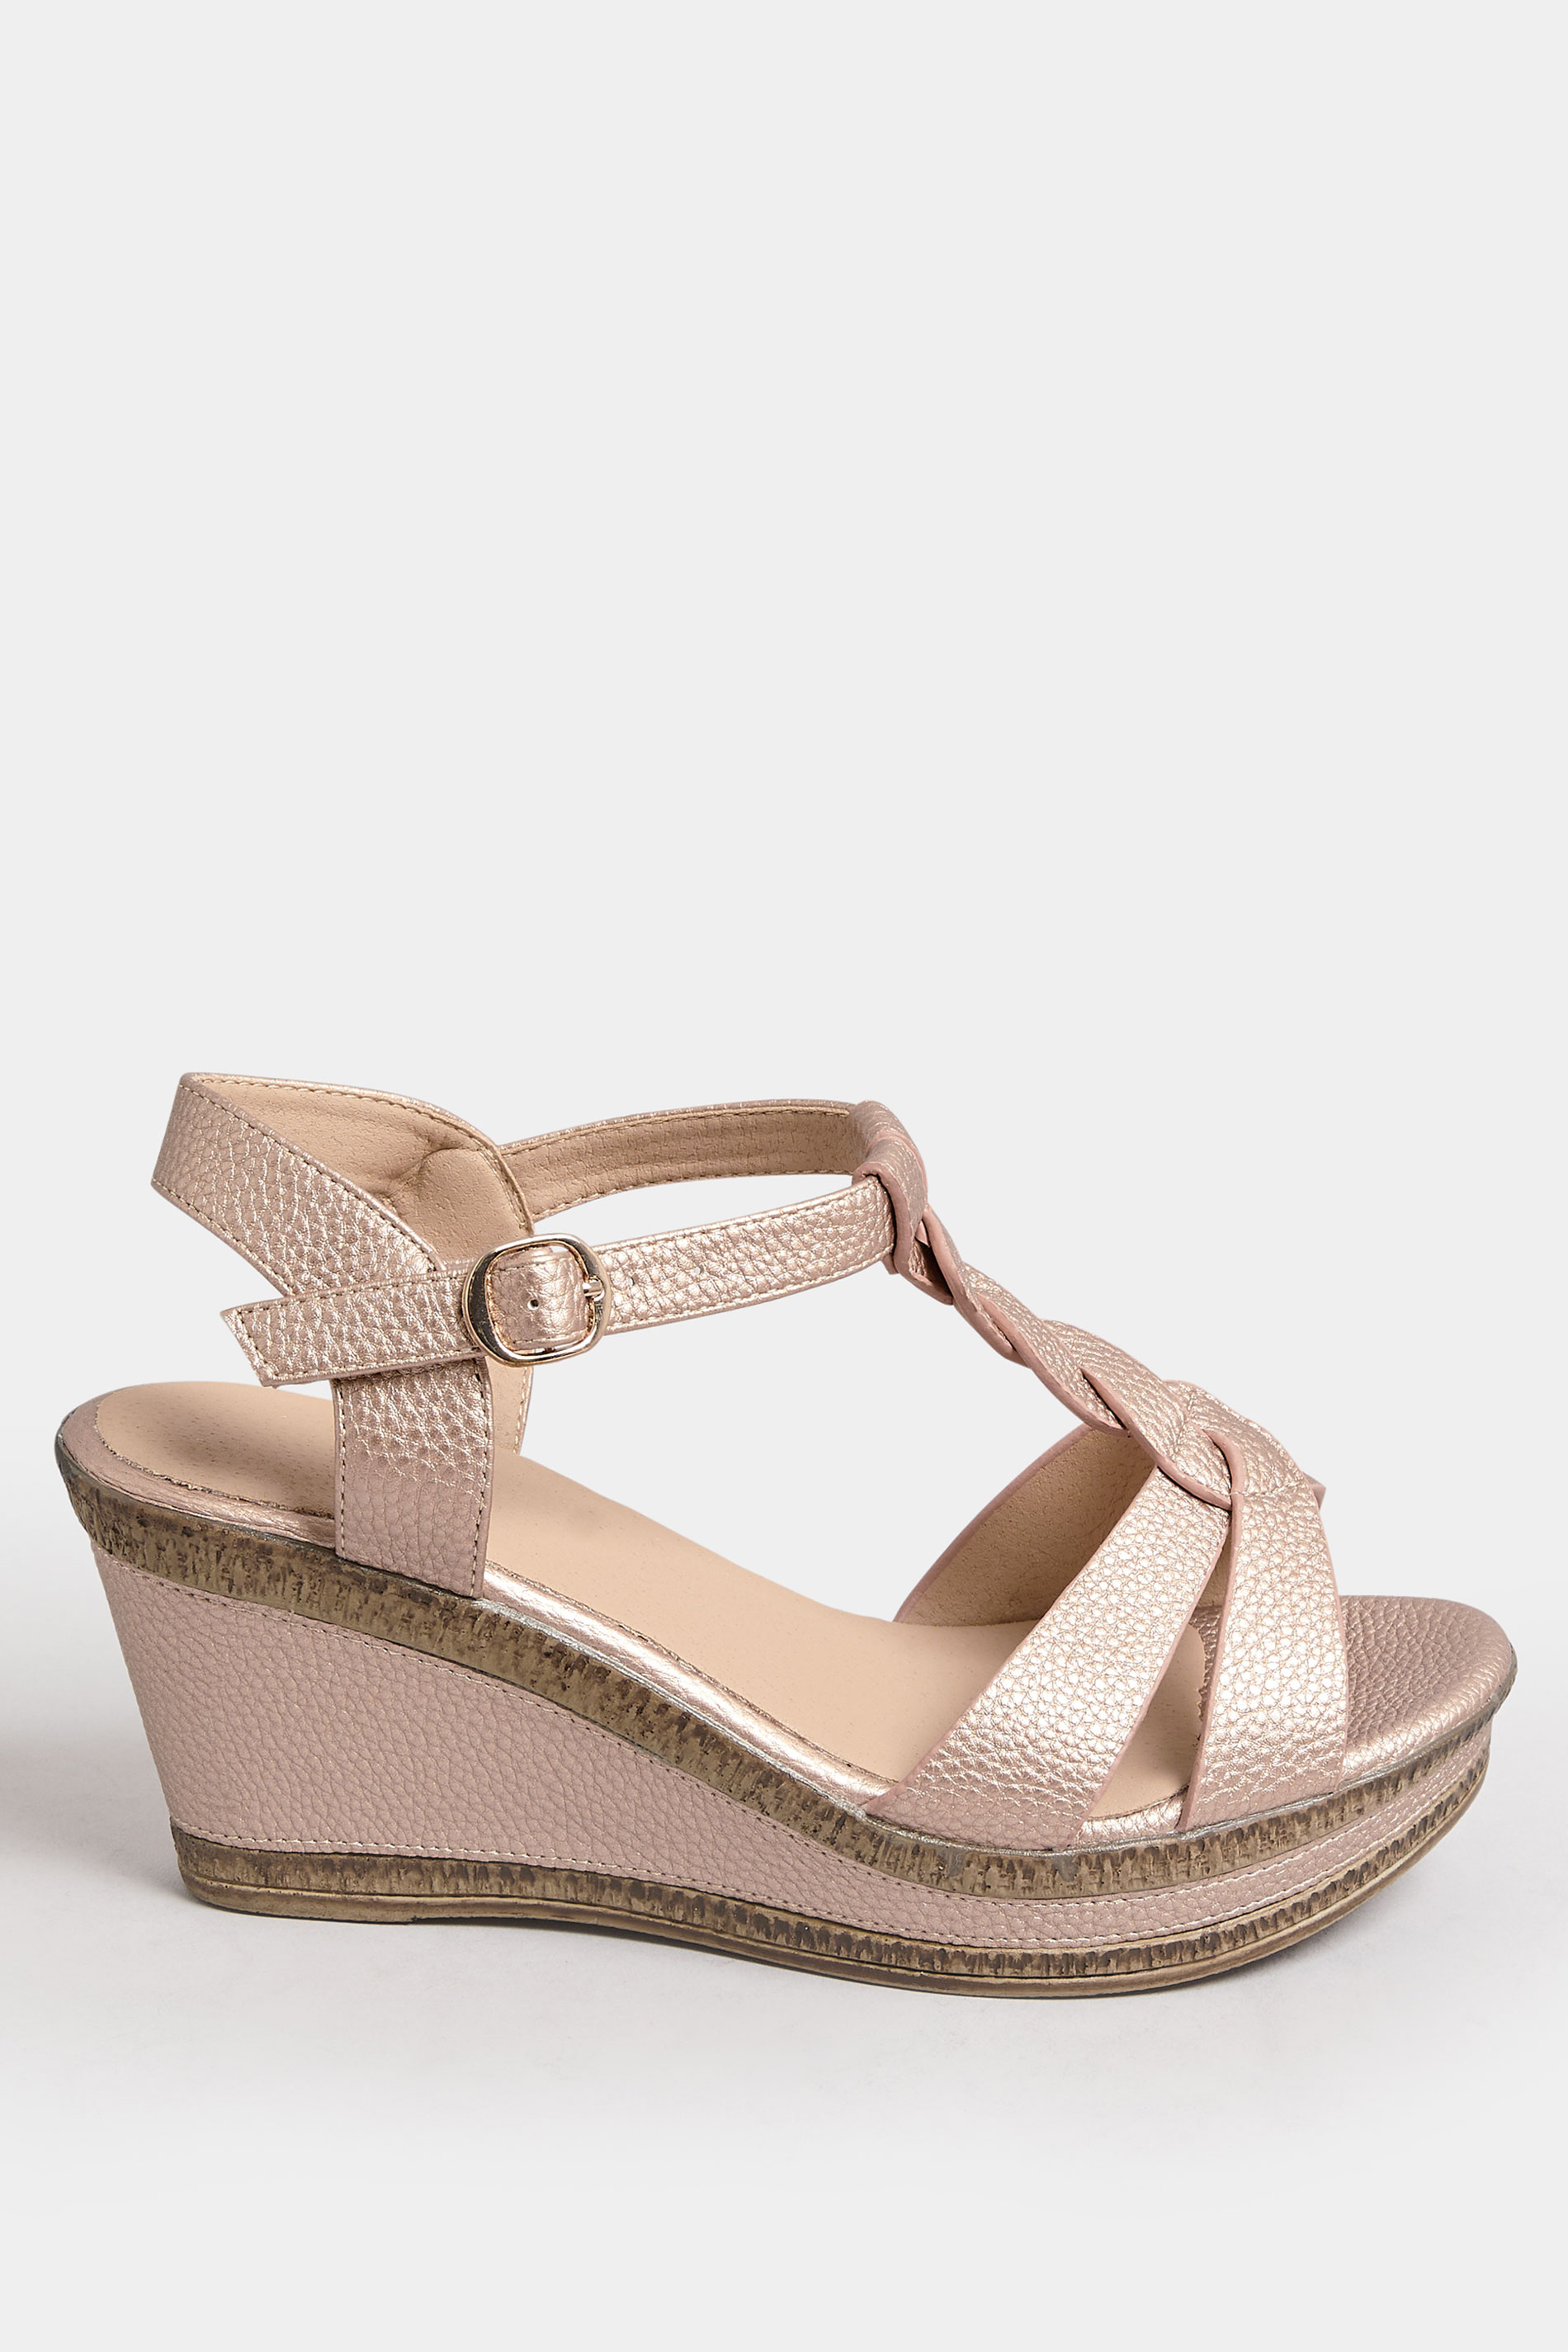 Rose Gold Cross Strap Wedge Heels In Extra Wide EEE Fit | Yours Clothing  3